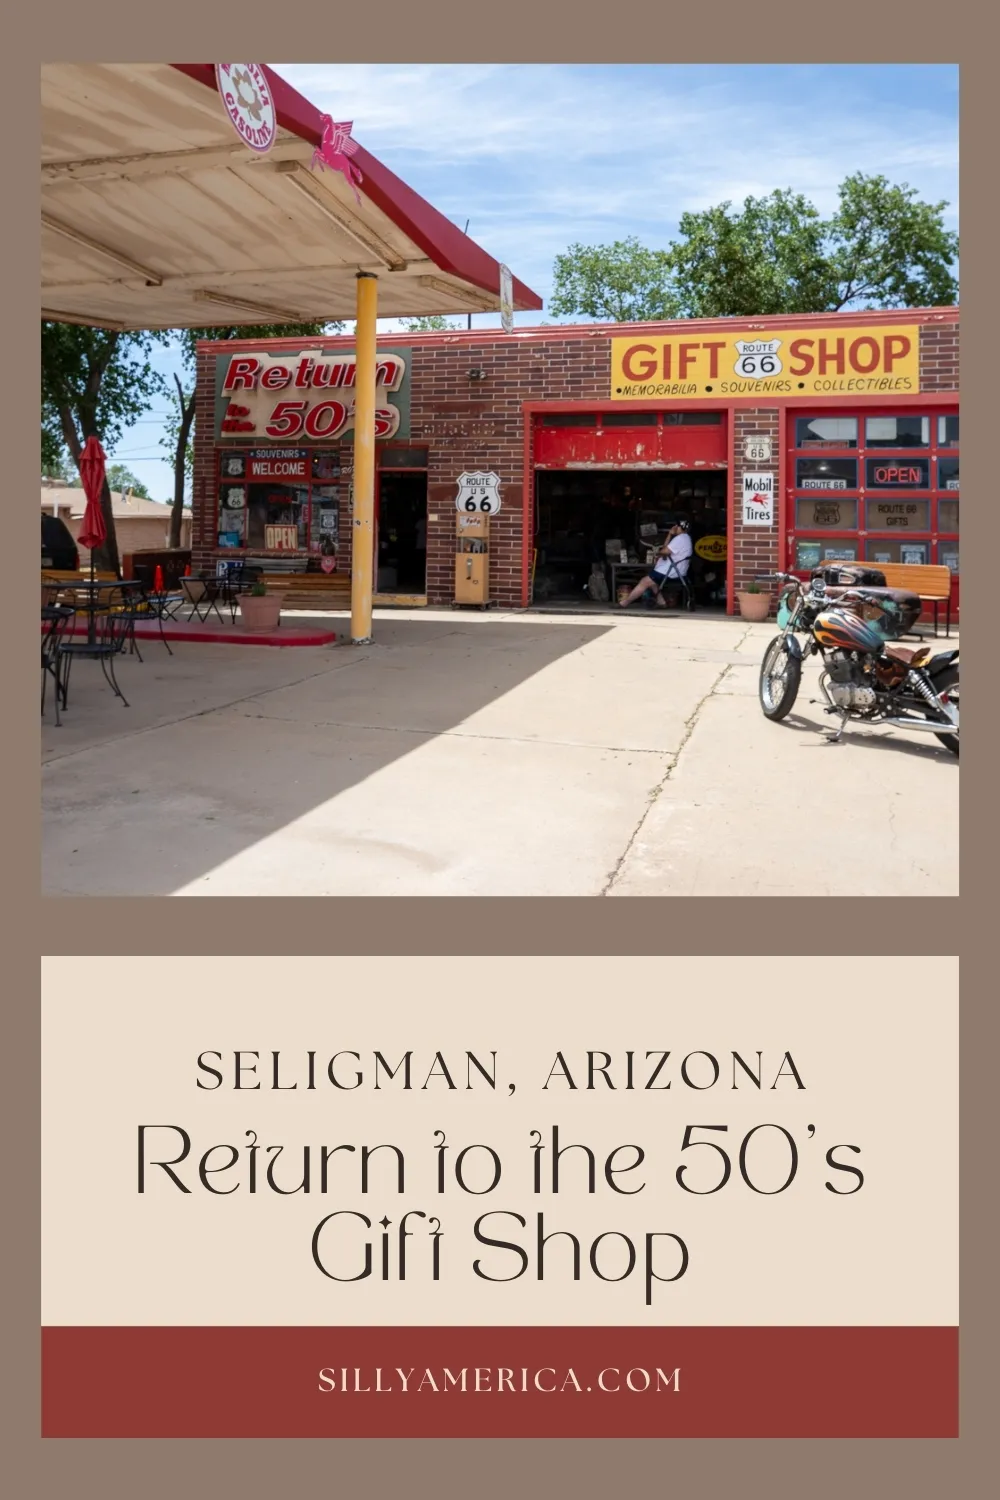 Return to the 50’s Gift Shop in Seligman, Arizona is a blast to the past. Shop for fun souvenirs in a vintage service station on Route 66. Return to the 50’s opened in Seligman in 2007. Housed in the old Olson’s Shell station, the gift shop features Route 66 souvenirs, collectibles, and memorabilia inside a vintage service station and garage. Visit on your Route 66 road trip - add it to your travel itinerary! #Route66 #Route66RoadTrip #ArizonaRoute66 #RoadsideAttraction #RoadsideAmerica